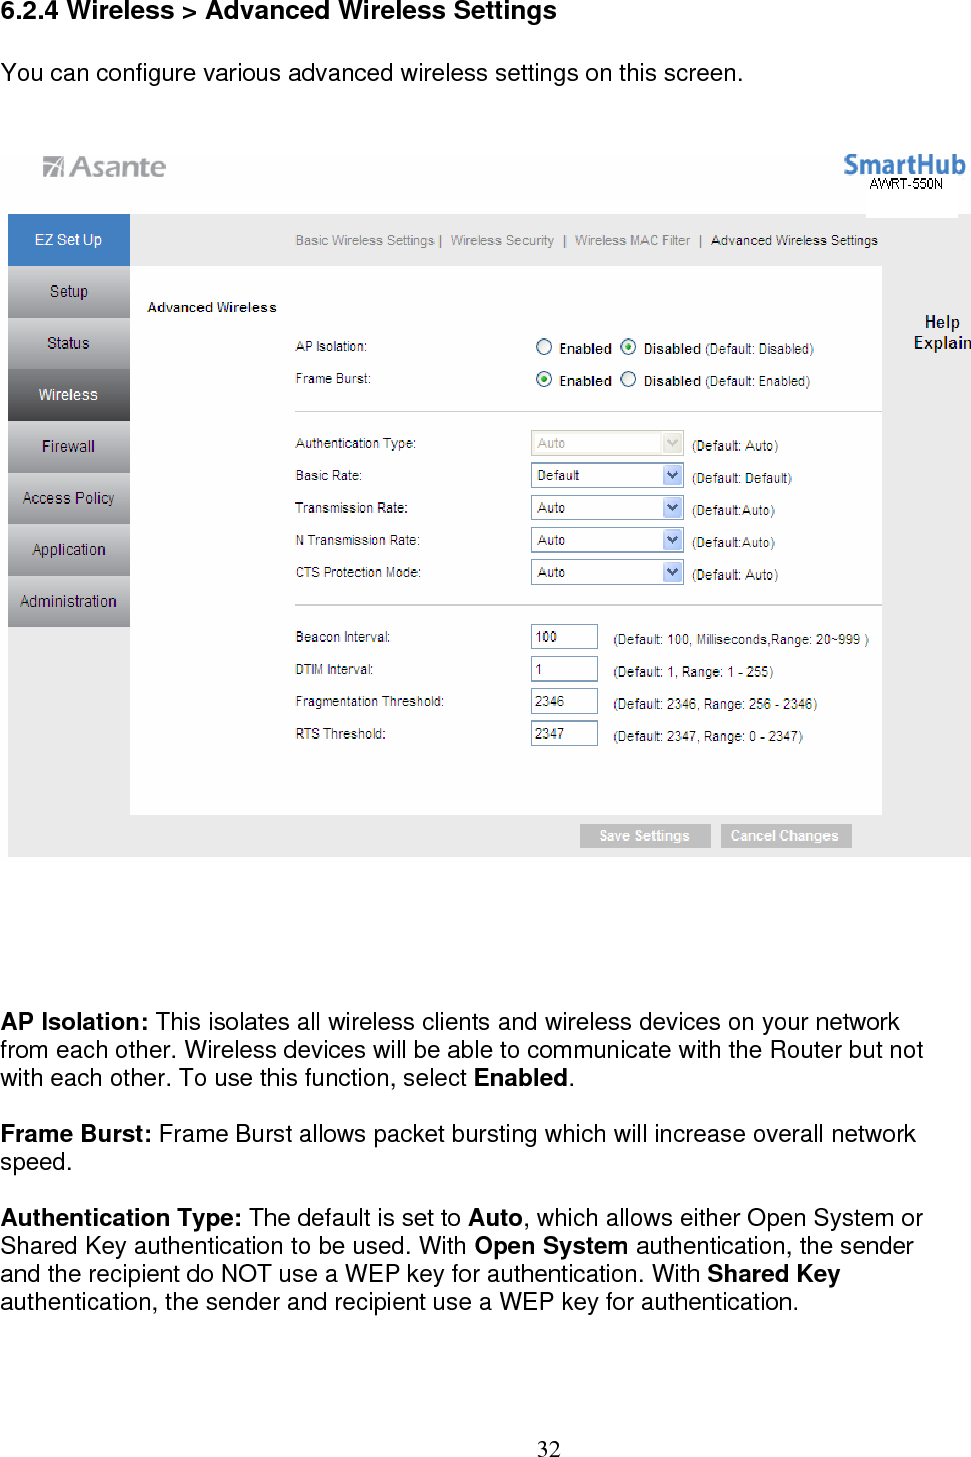  326.2.4 Wireless &gt; Advanced Wireless Settings You can configure various advanced wireless settings on this screen.  AP Isolation: This isolates all wireless clients and wireless devices on your network  from each other. Wireless devices will be able to communicate with the Router but not with each other. To use this function, select Enabled.  Frame Burst: Frame Burst allows packet bursting which will increase overall network  speed.  Authentication Type: The default is set to Auto, which allows either Open System or Shared Key authentication to be used. With Open System authentication, the sender  and the recipient do NOT use a WEP key for authentication. With Shared Key  authentication, the sender and recipient use a WEP key for authentication.  